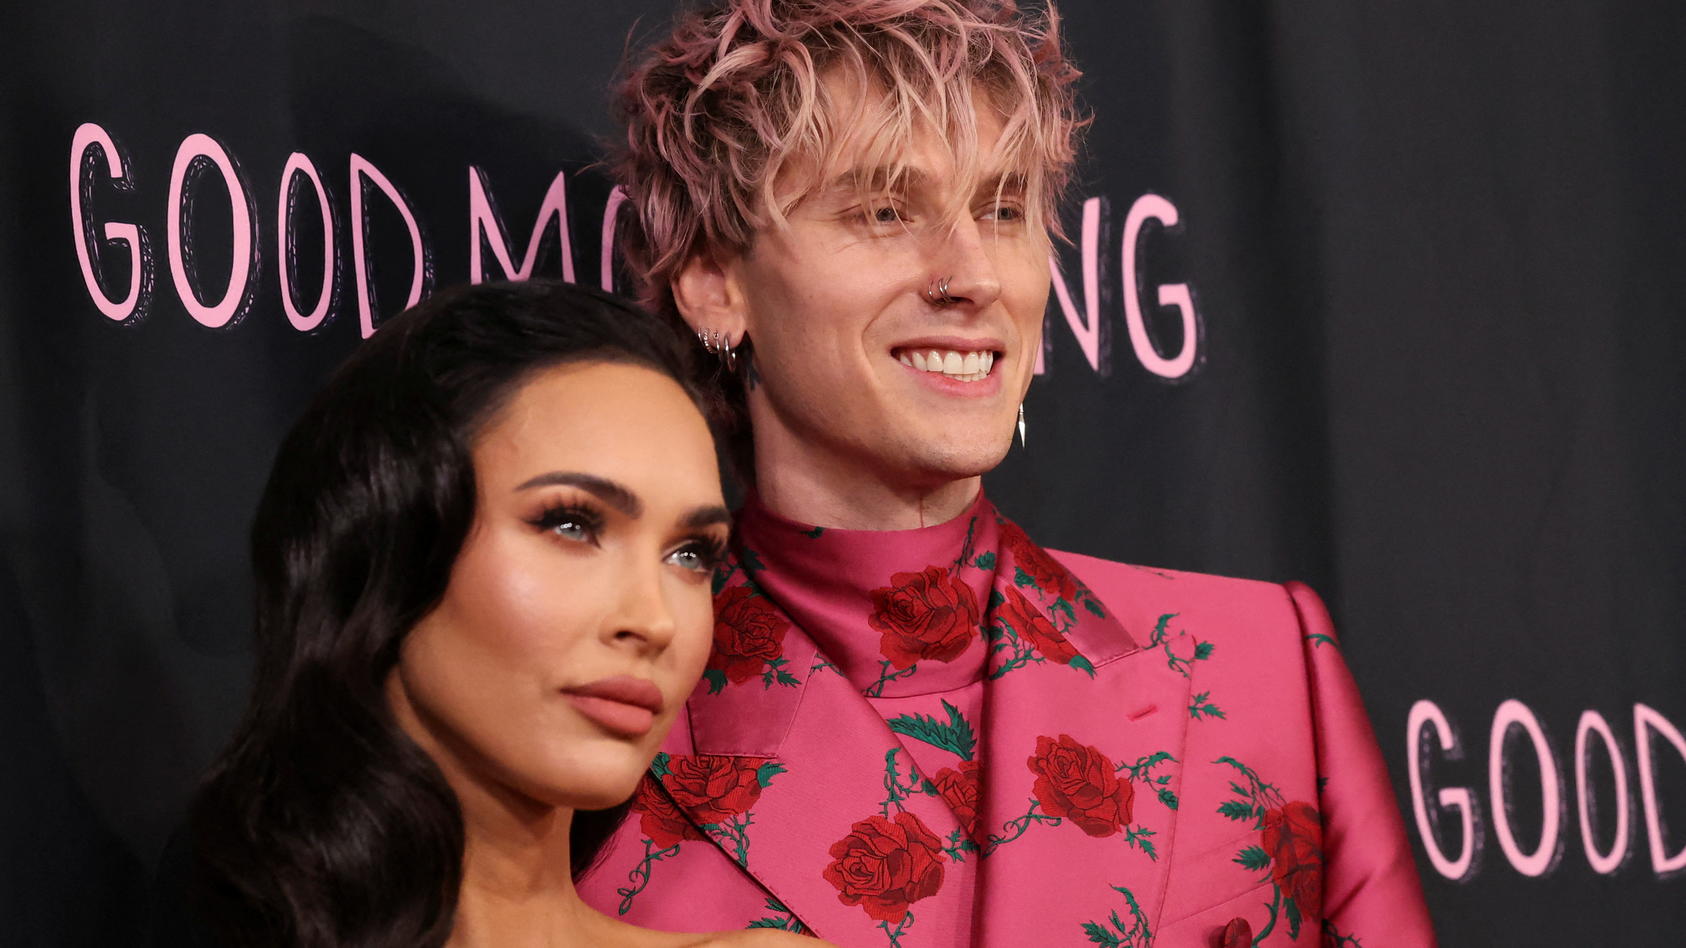 Director Machine Gun Kelly and cast member Megan Fox attend a premiere for the film Good Mourning in West Hollywood, California, U.S. May 12, 2022. REUTERS/Mario Anzuoni